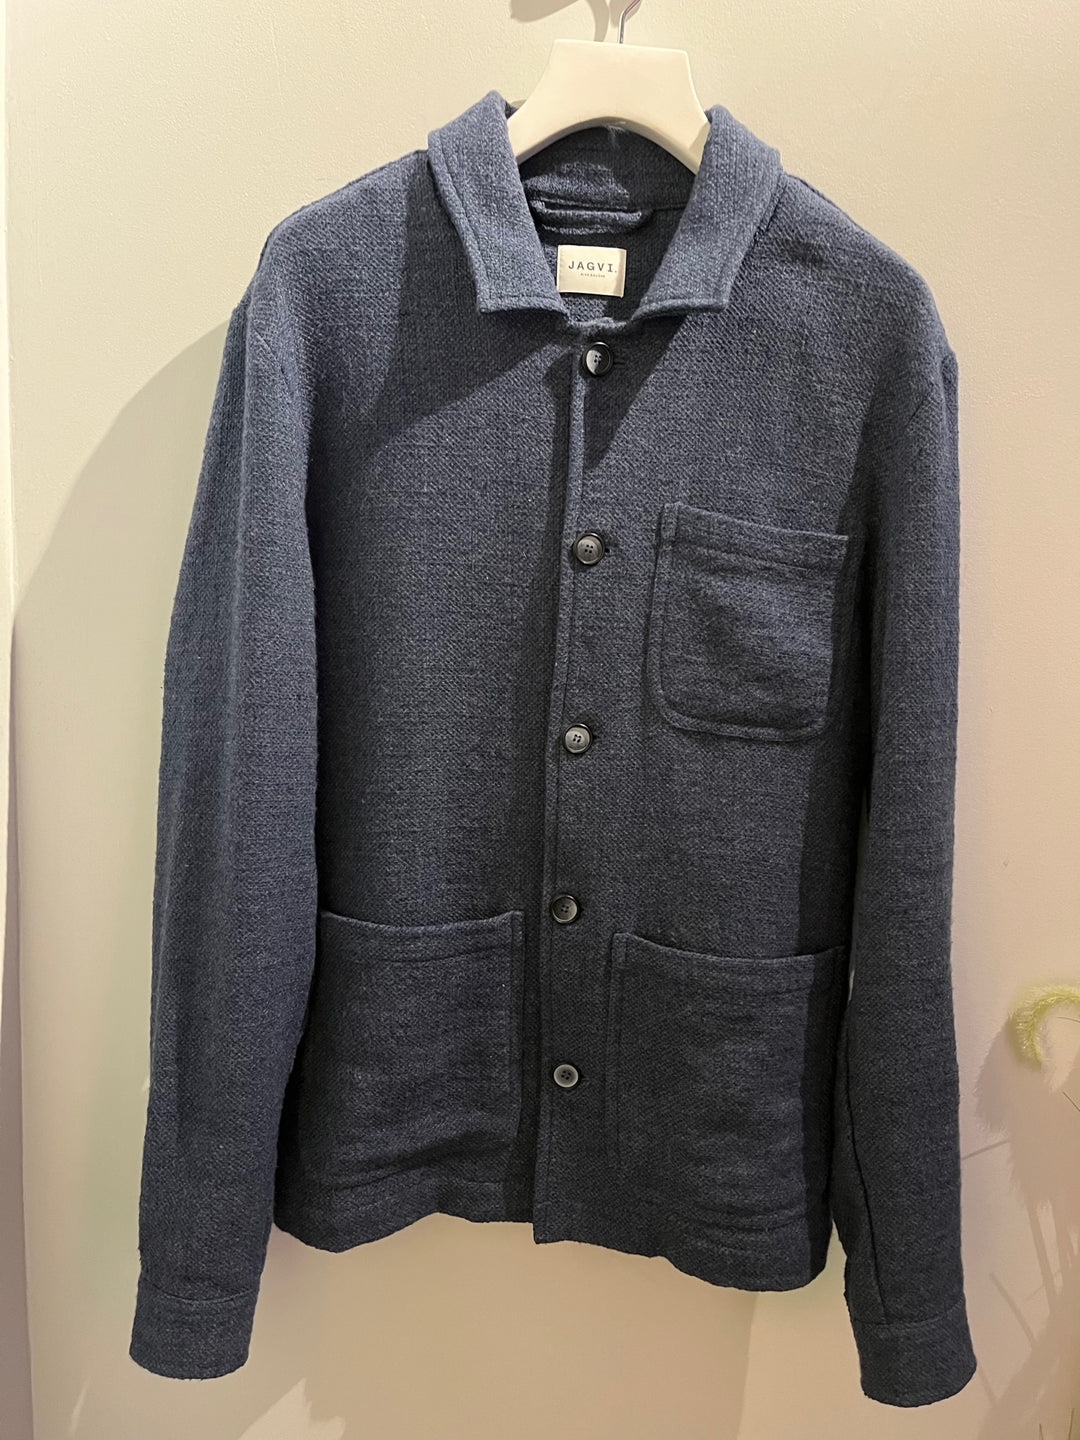 Navy blue recycled wool jacket